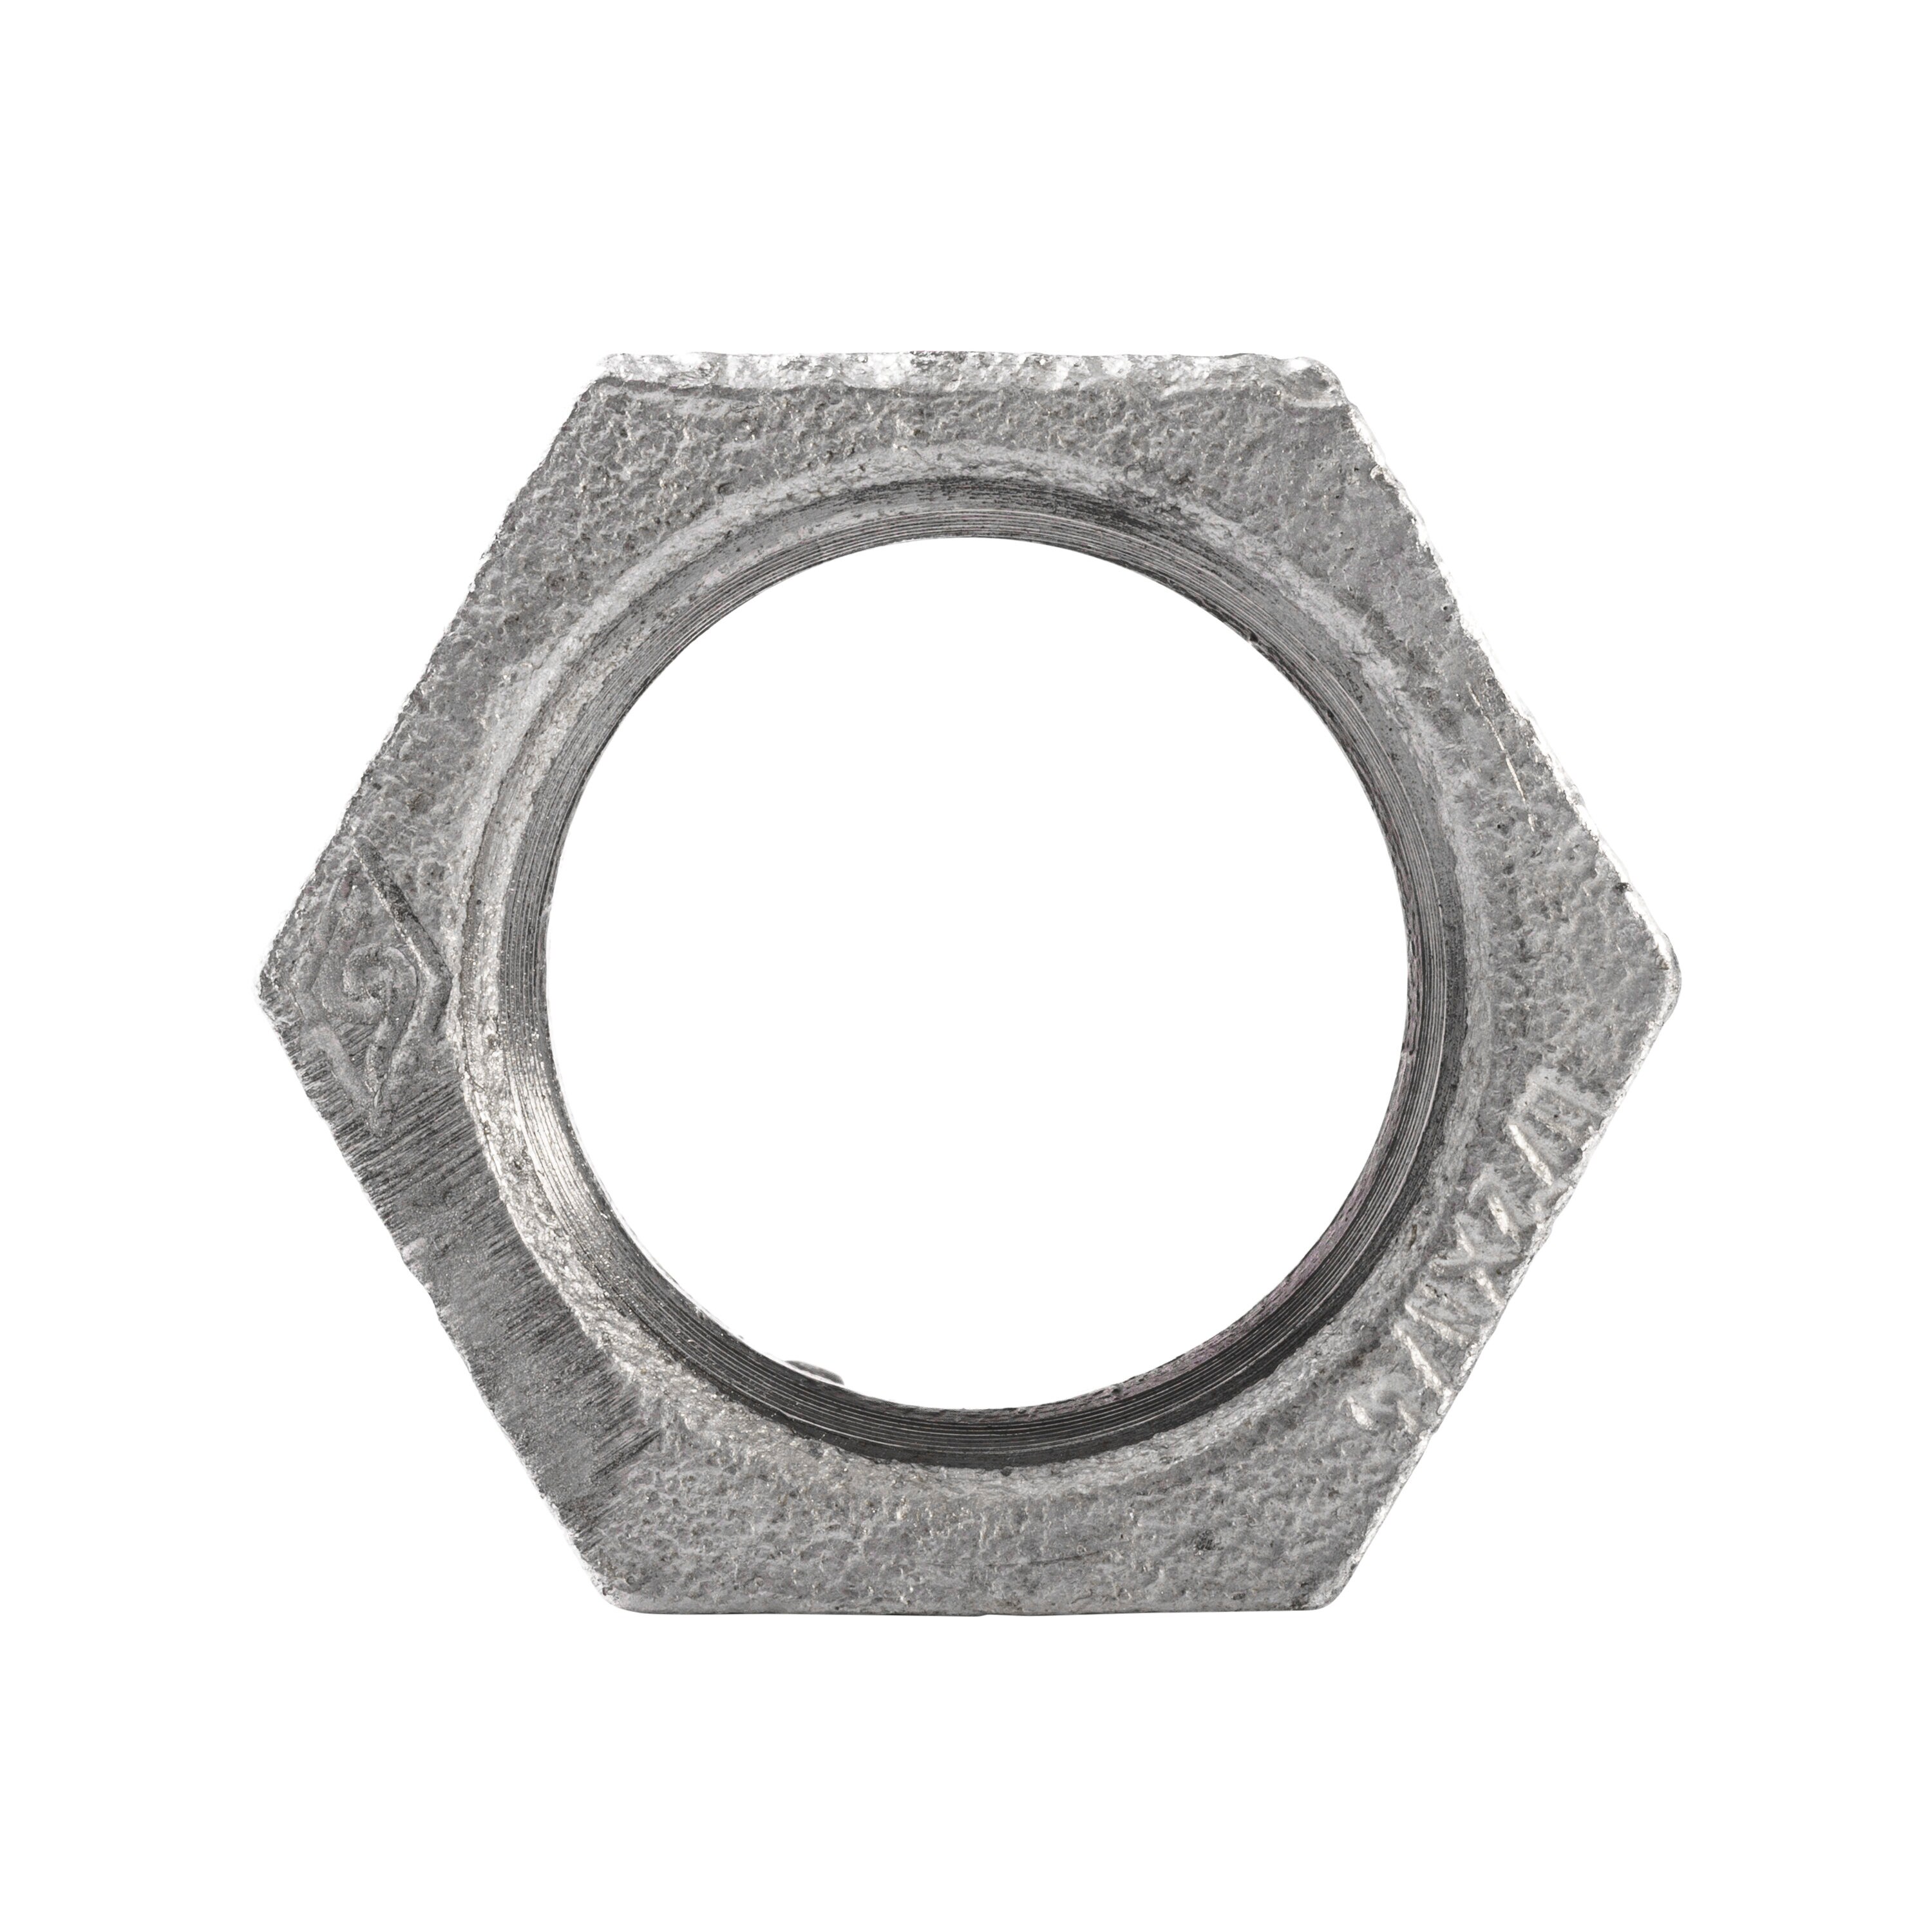 RELIABILT 1-1/2-in x 1-1/4-in Galvanized the Bushing department Hex in Fittings & Pipe Galvanized at